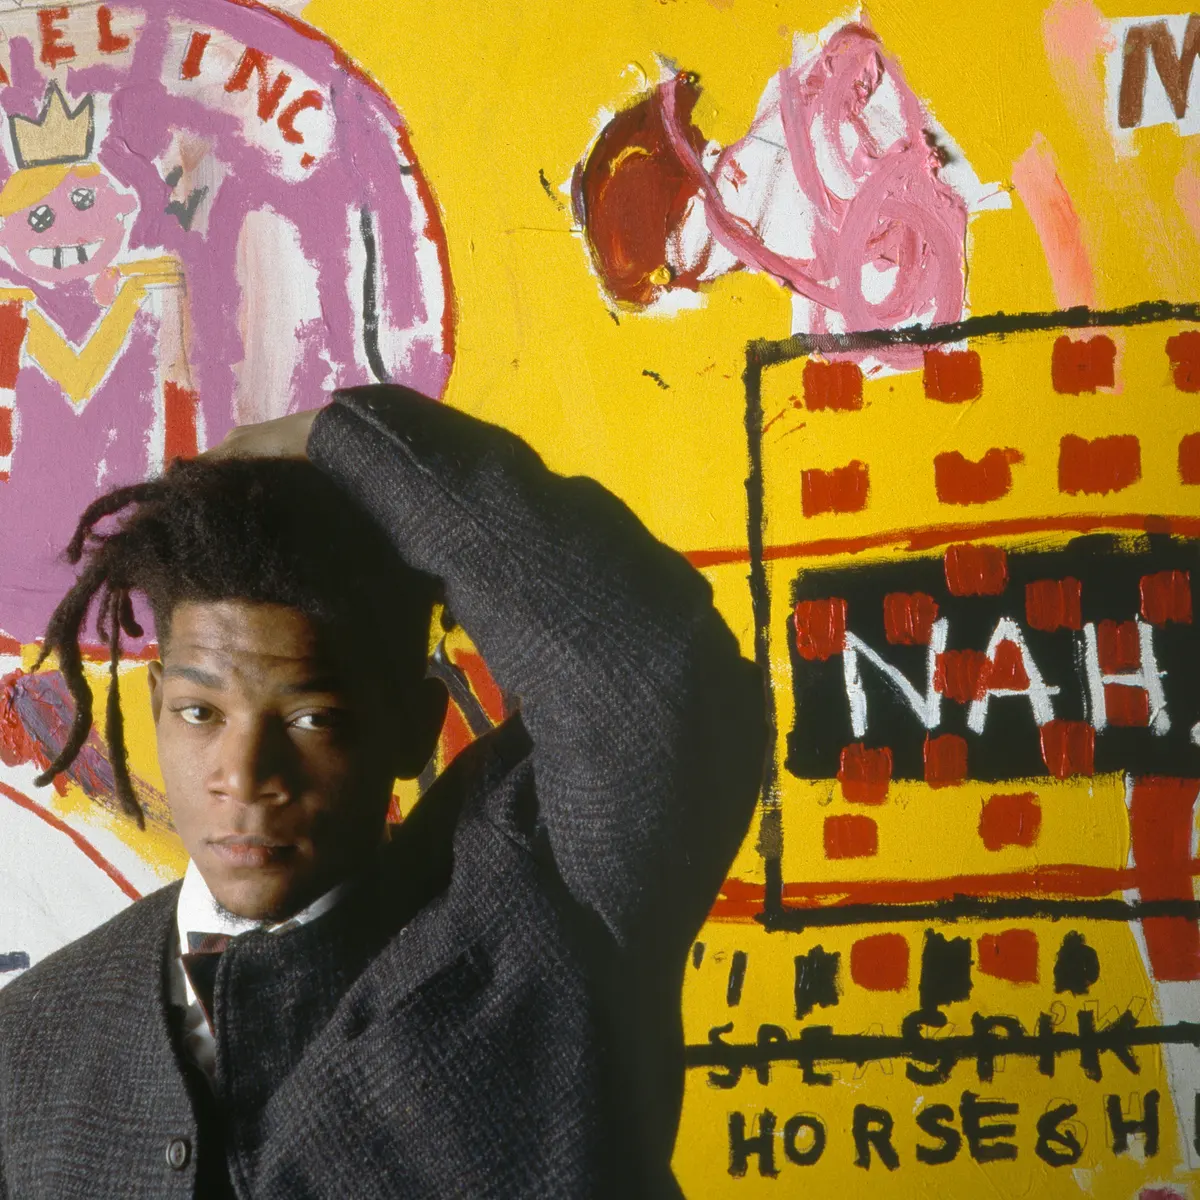 Will The New Biopic on Jean-Michel Basquiat Break The Chain of Exploitation of The Artist’s Legacy? 